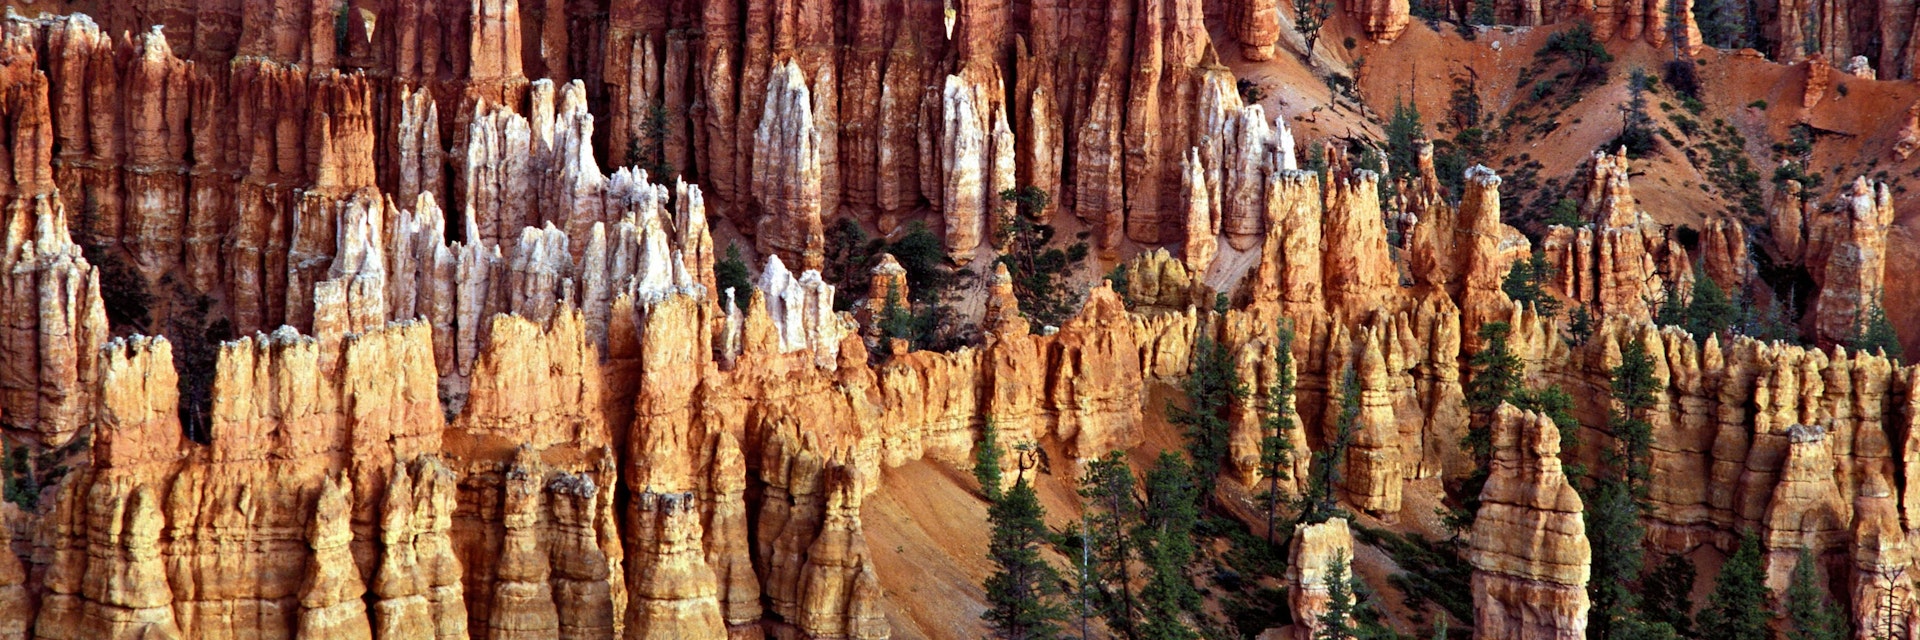 HOODOS, PINNACLES AND SPORES, DIFFERENTIAL EROSION. LIMESTONE SEDIMENTARY ROCK. BRYCE CANYON, UTAH. BRYCE POINT